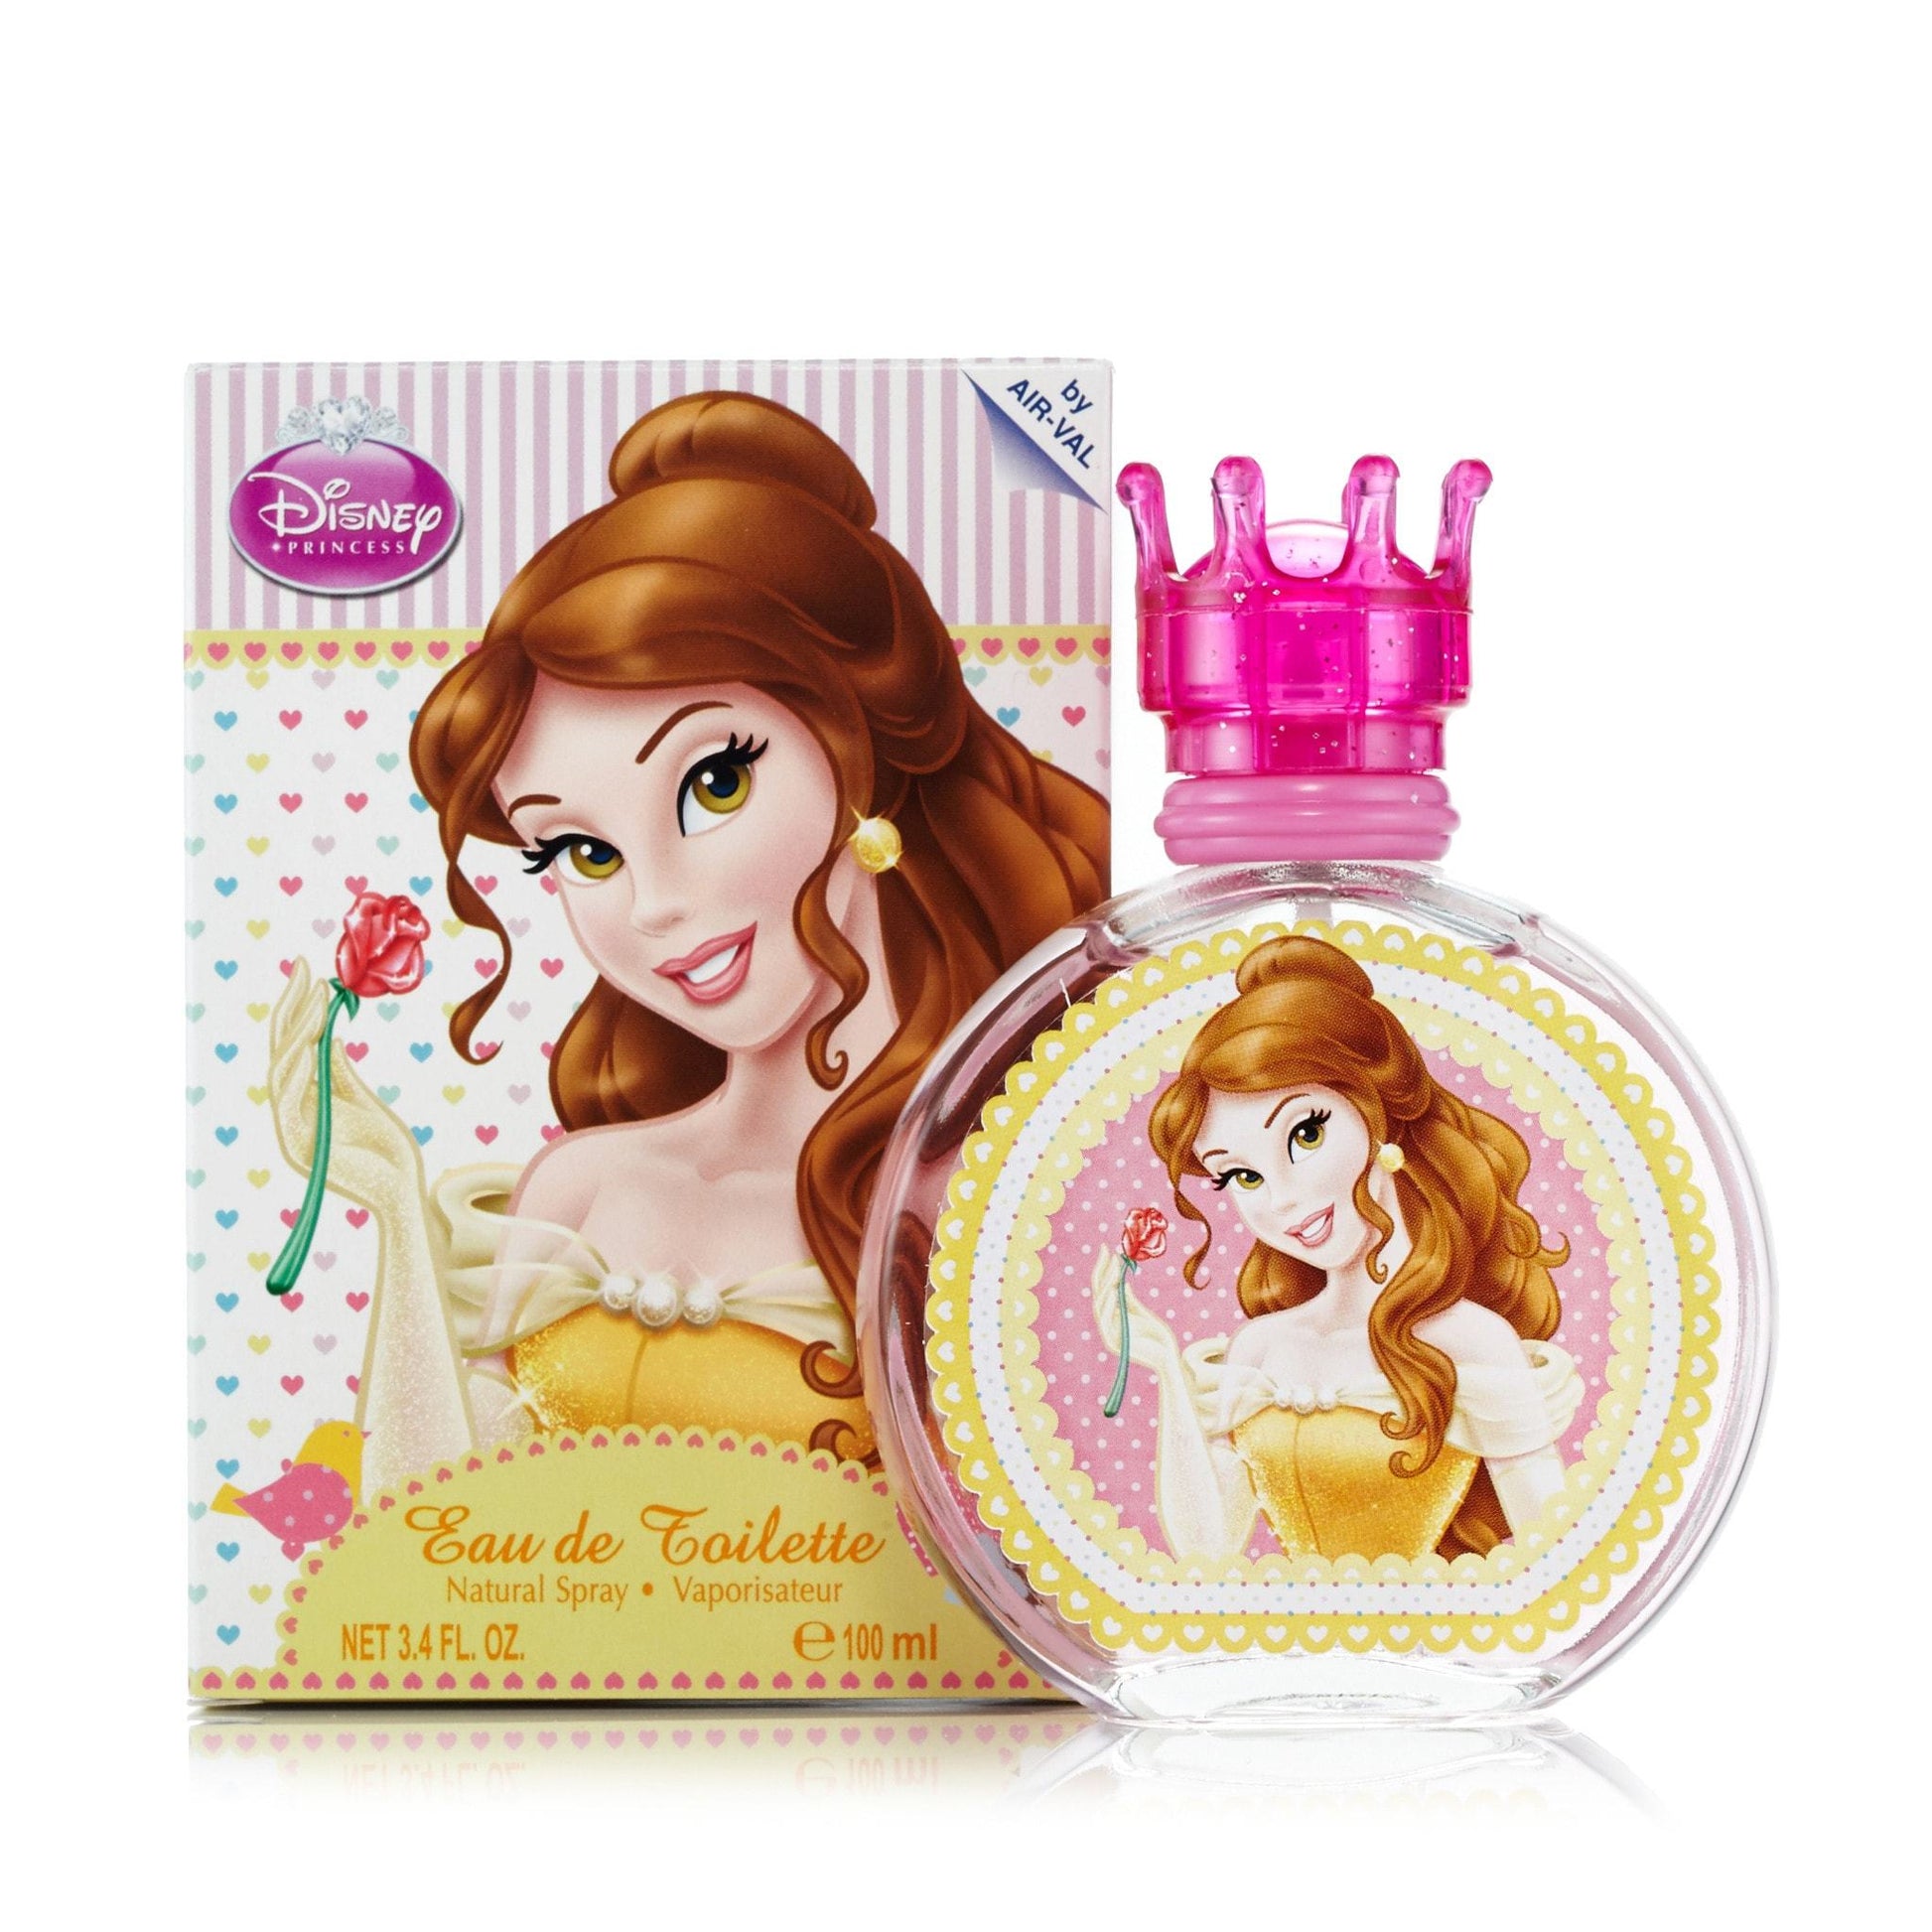 Beauty and the Beast Eau de Toilette Spray for Girls by Disney, Product image 1